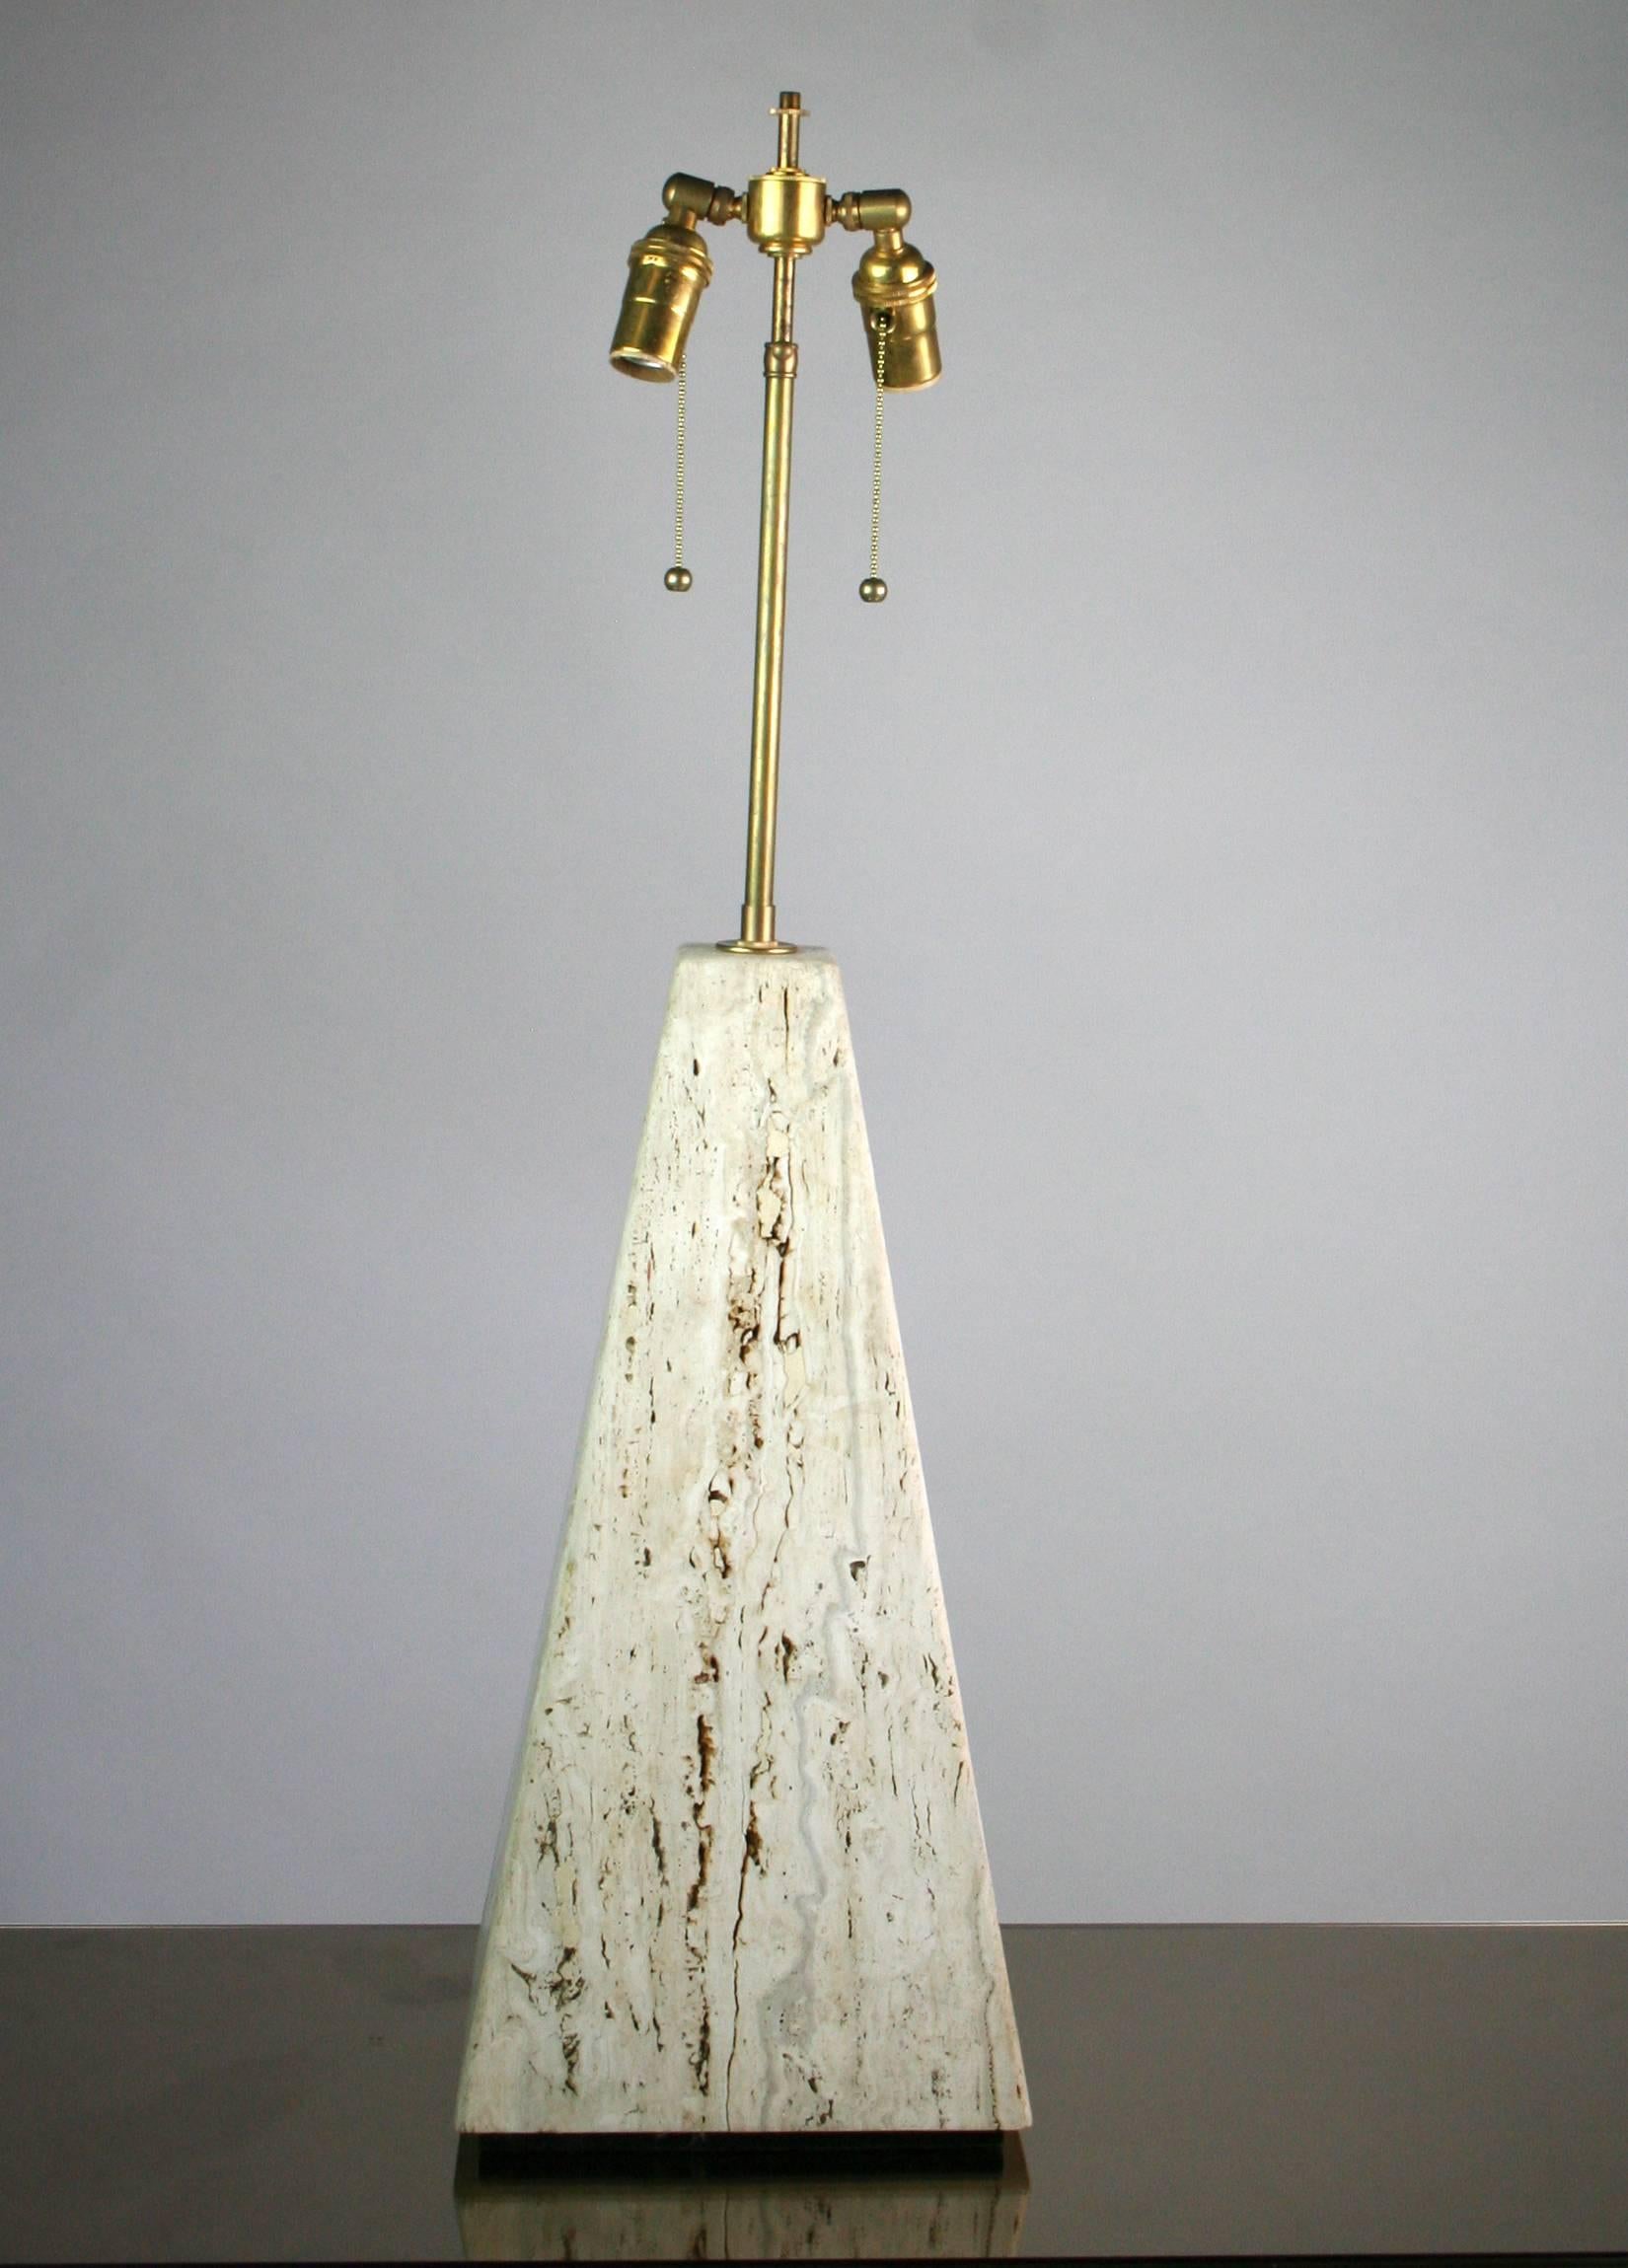 An Italian travertine lamp of obelisk form with new brass double cluster sockets and cloth cord. signed on a brass plaque "H.R." Base is 10" square x 20" tall. Overall height is 34 1/2". Shade for display only.